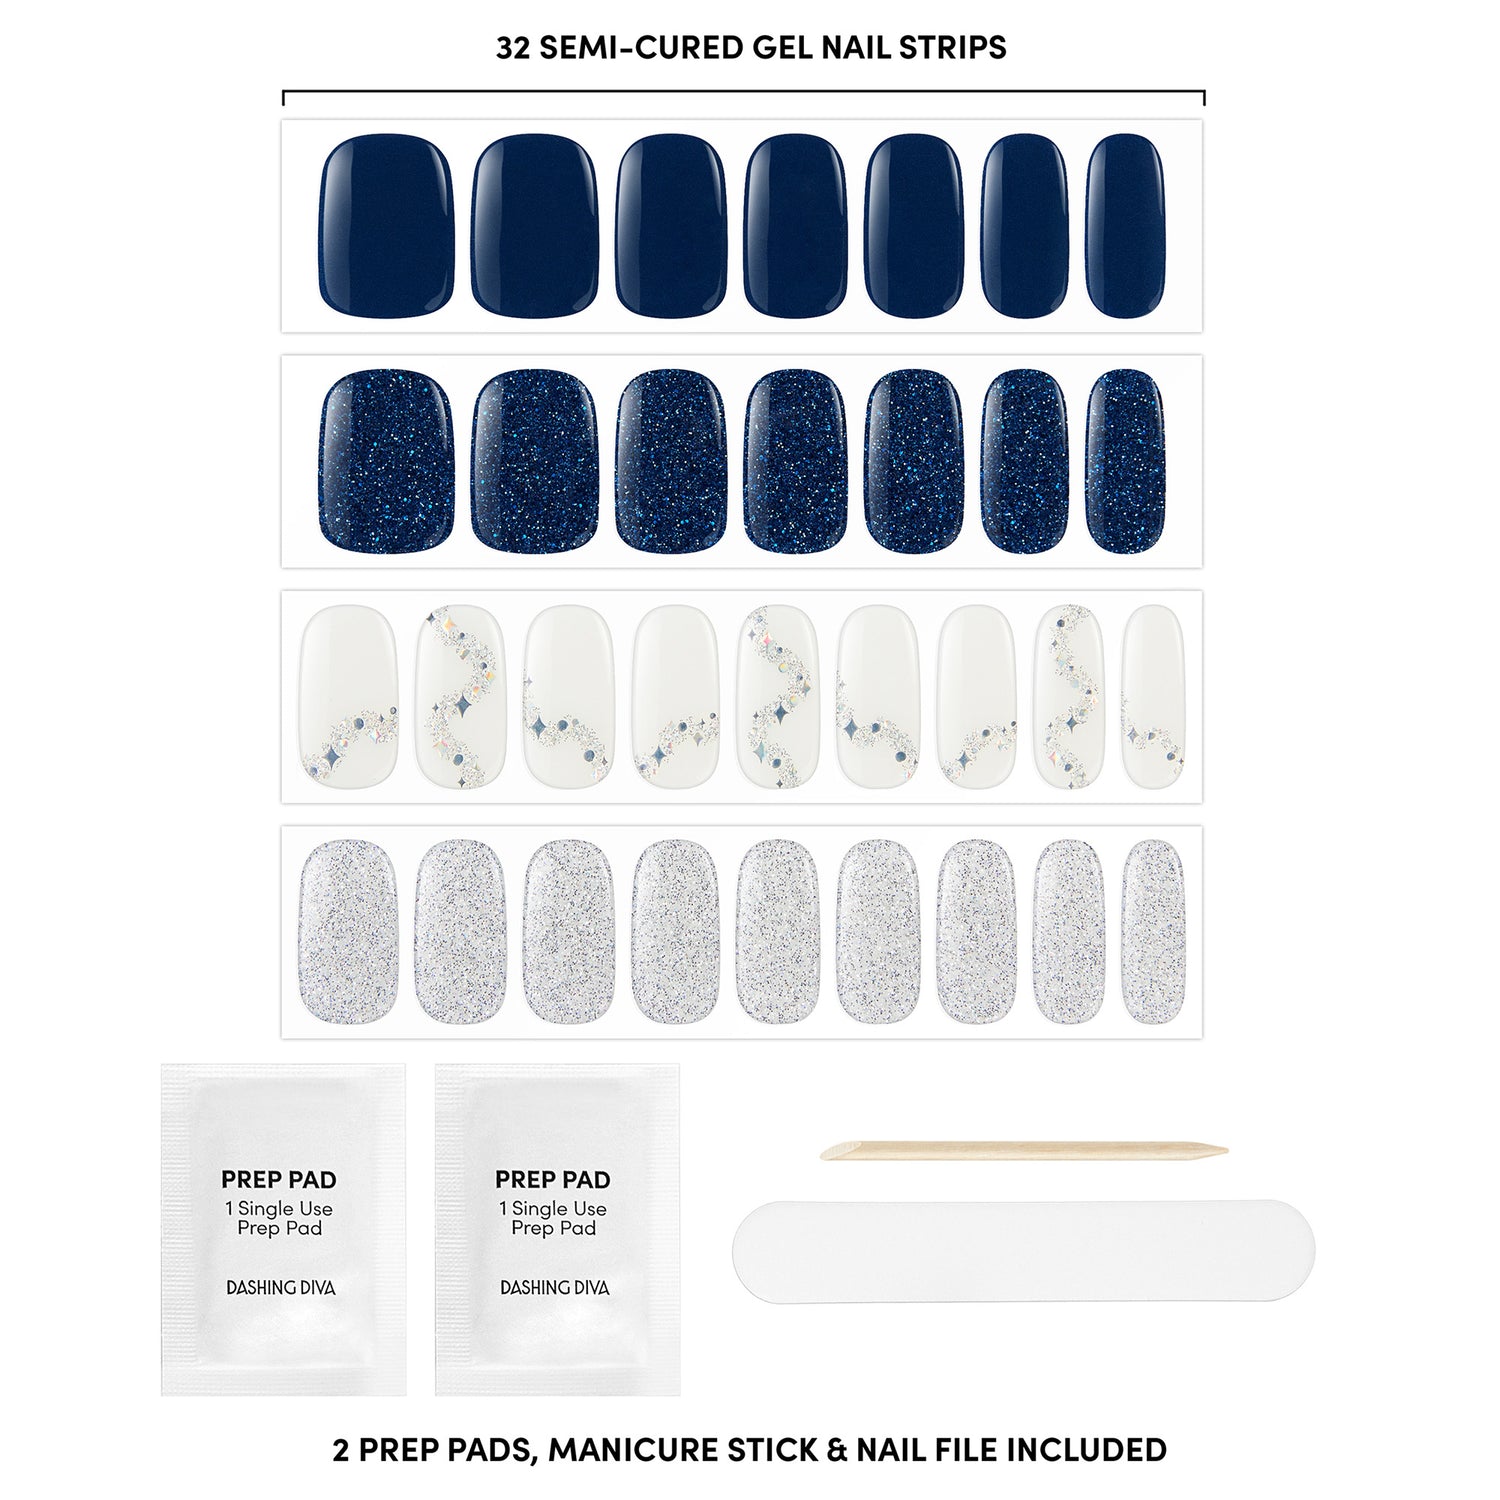 Semi-cured milky white & navy blue gel nail strips featuring iridescent glitter, blue glitter, and iridescent foil starry accents with mega volume & maximum shine.